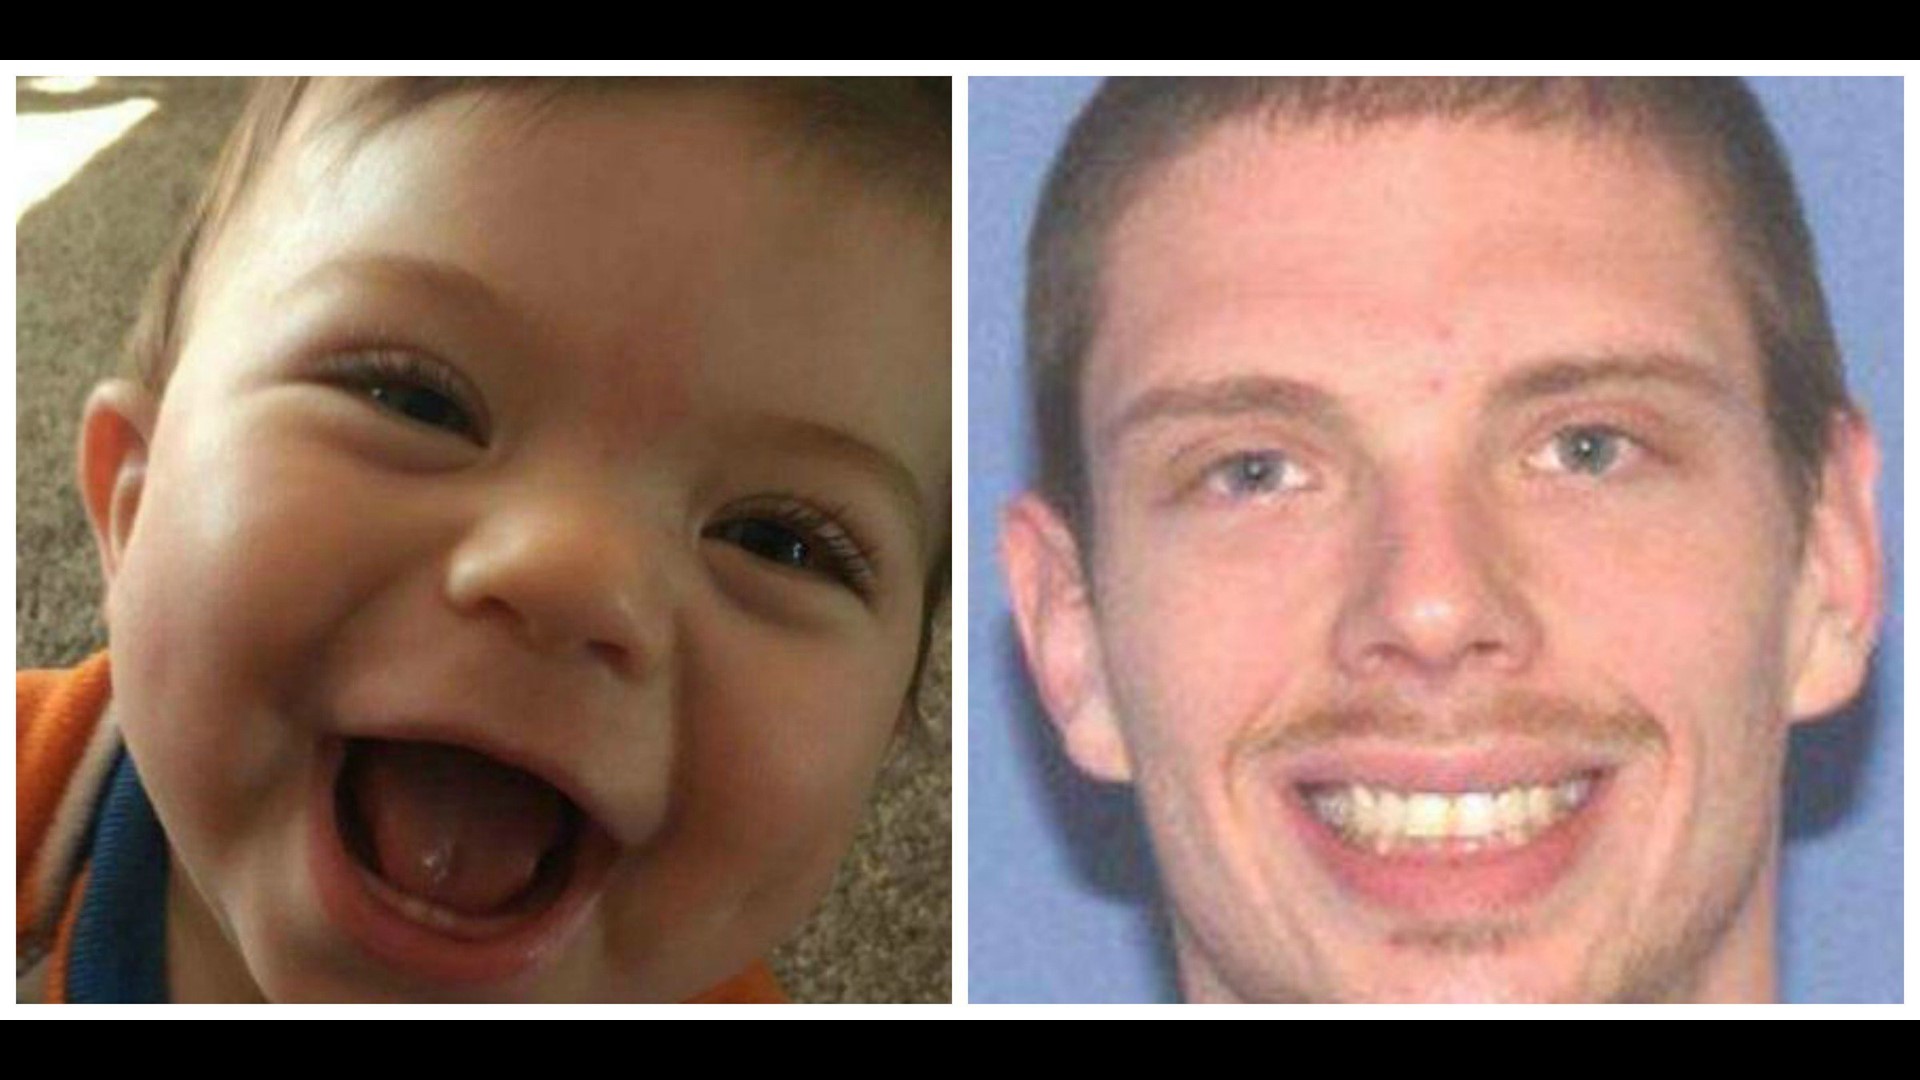 Ohio Amber Alert Canceled After 10 Month Old Is Found Safe Suspect In Custody 1967